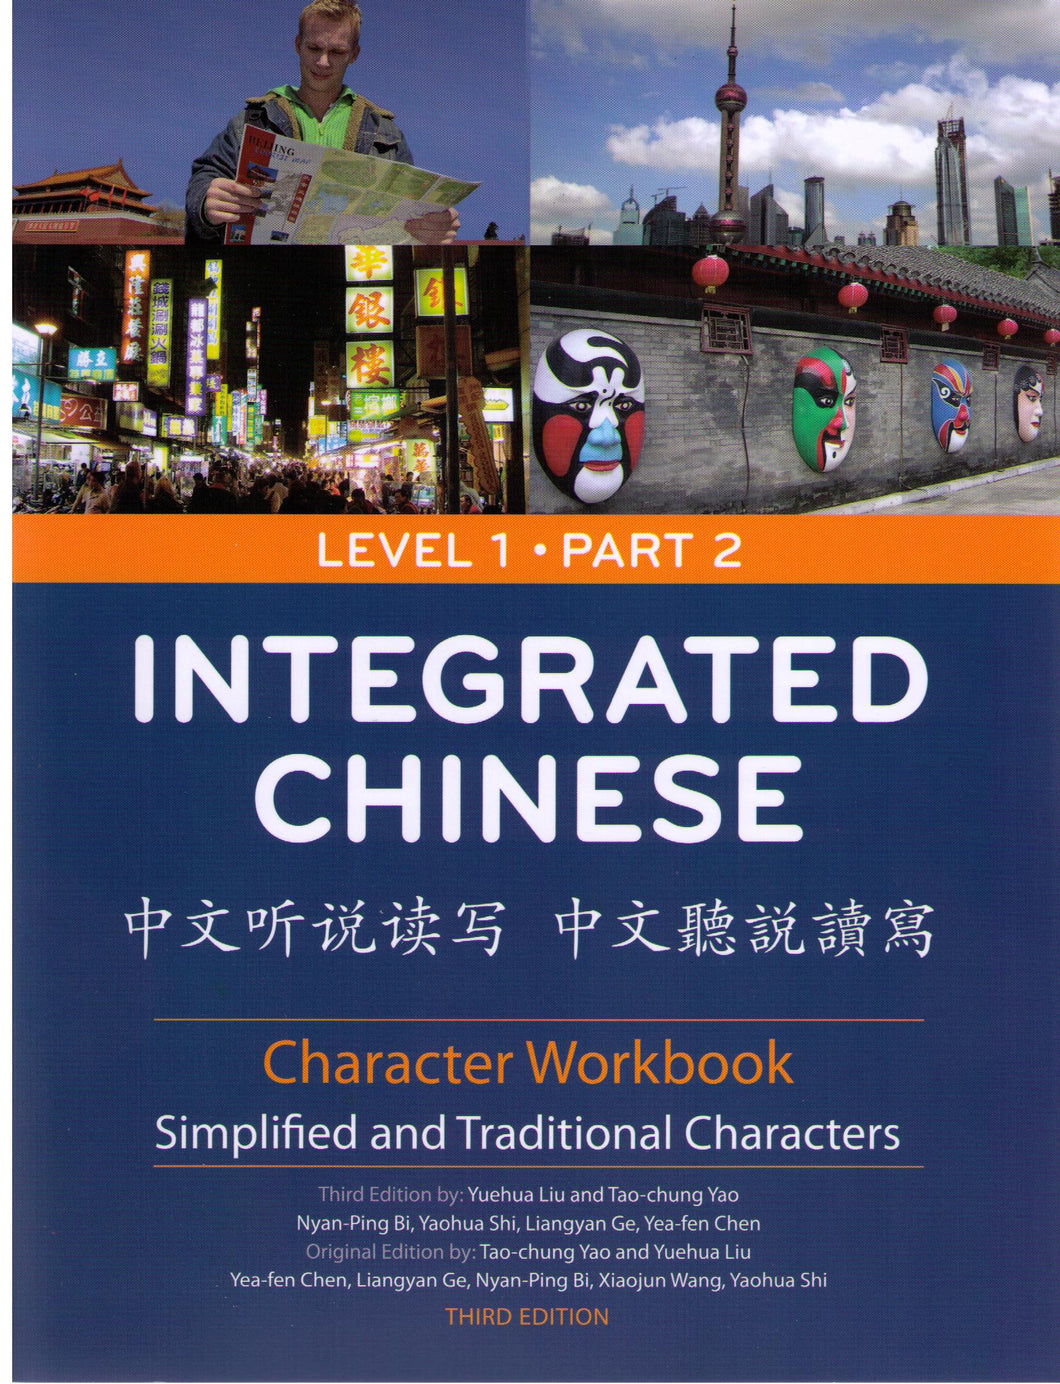 Integrated Chinese Level 1 Part 2-3rd Edition Character Workbook中文聽說讀寫